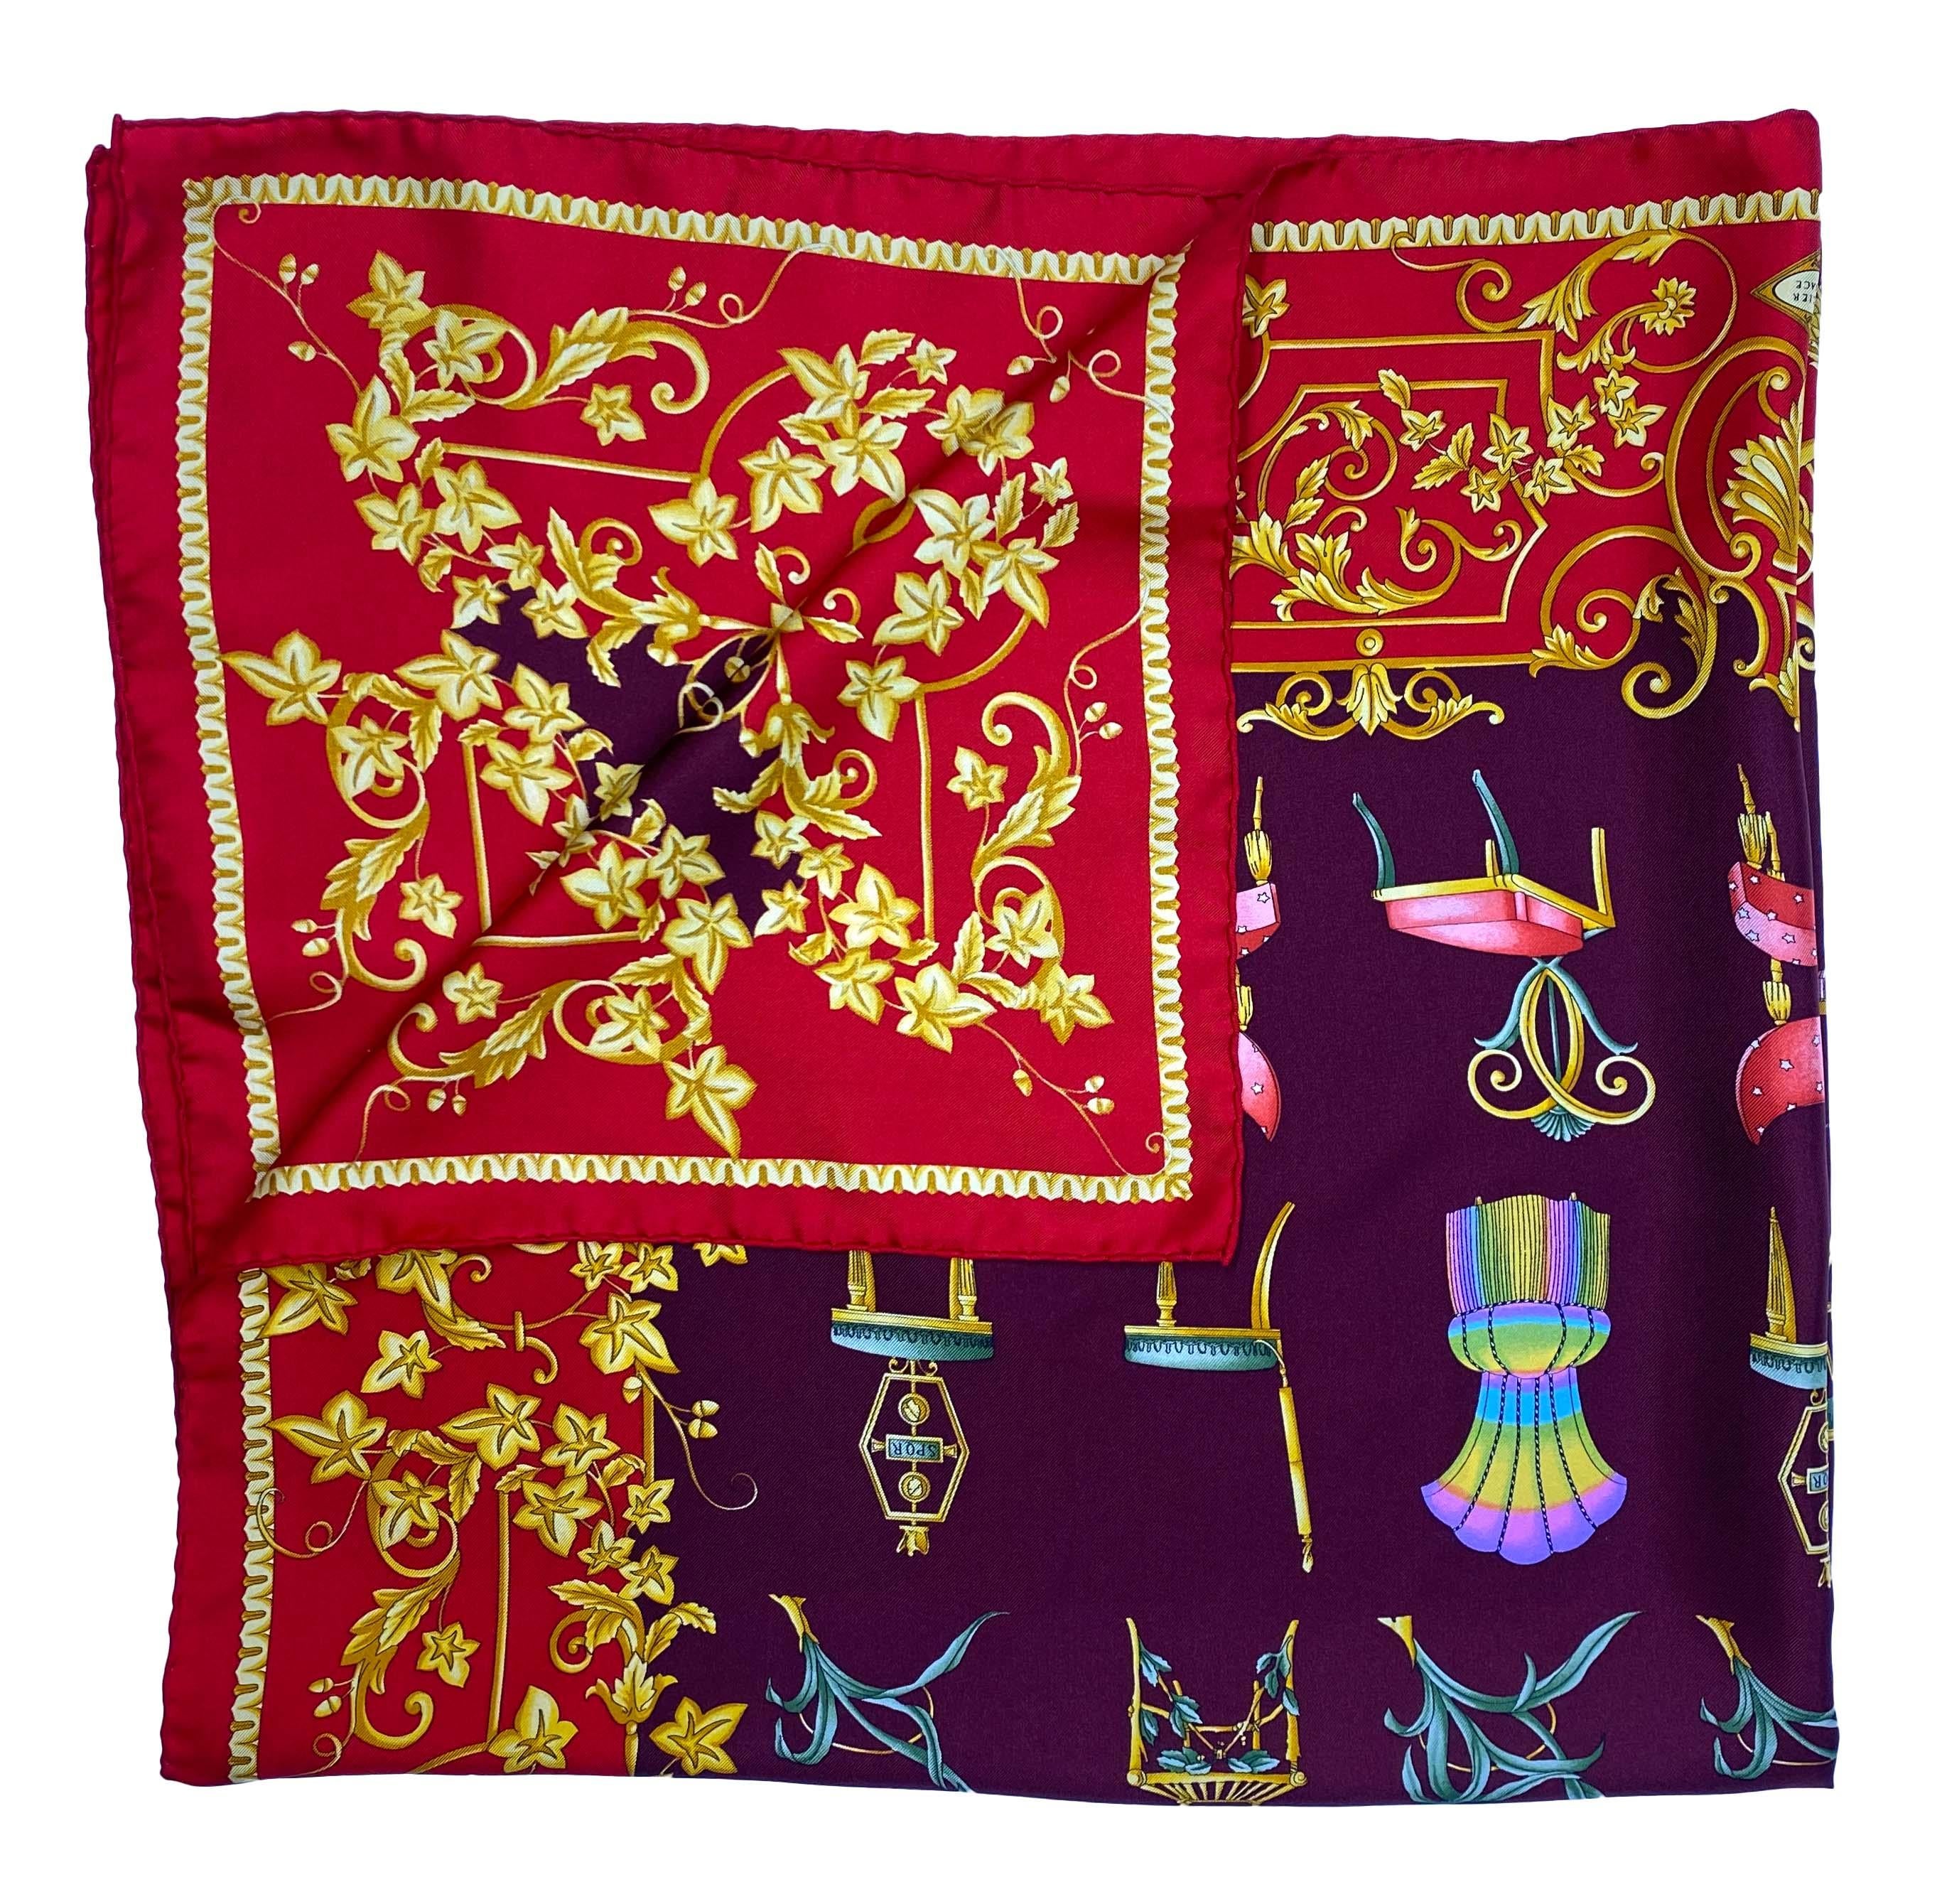 Presenting a beautiful baroque Atelier Versace square silk scarf, designed by Gianni Versace. This scarf features a number of chairs surrounded by a floral baroque pattern. A small Versace Medusa logo is situated opposite the Atelier Versace